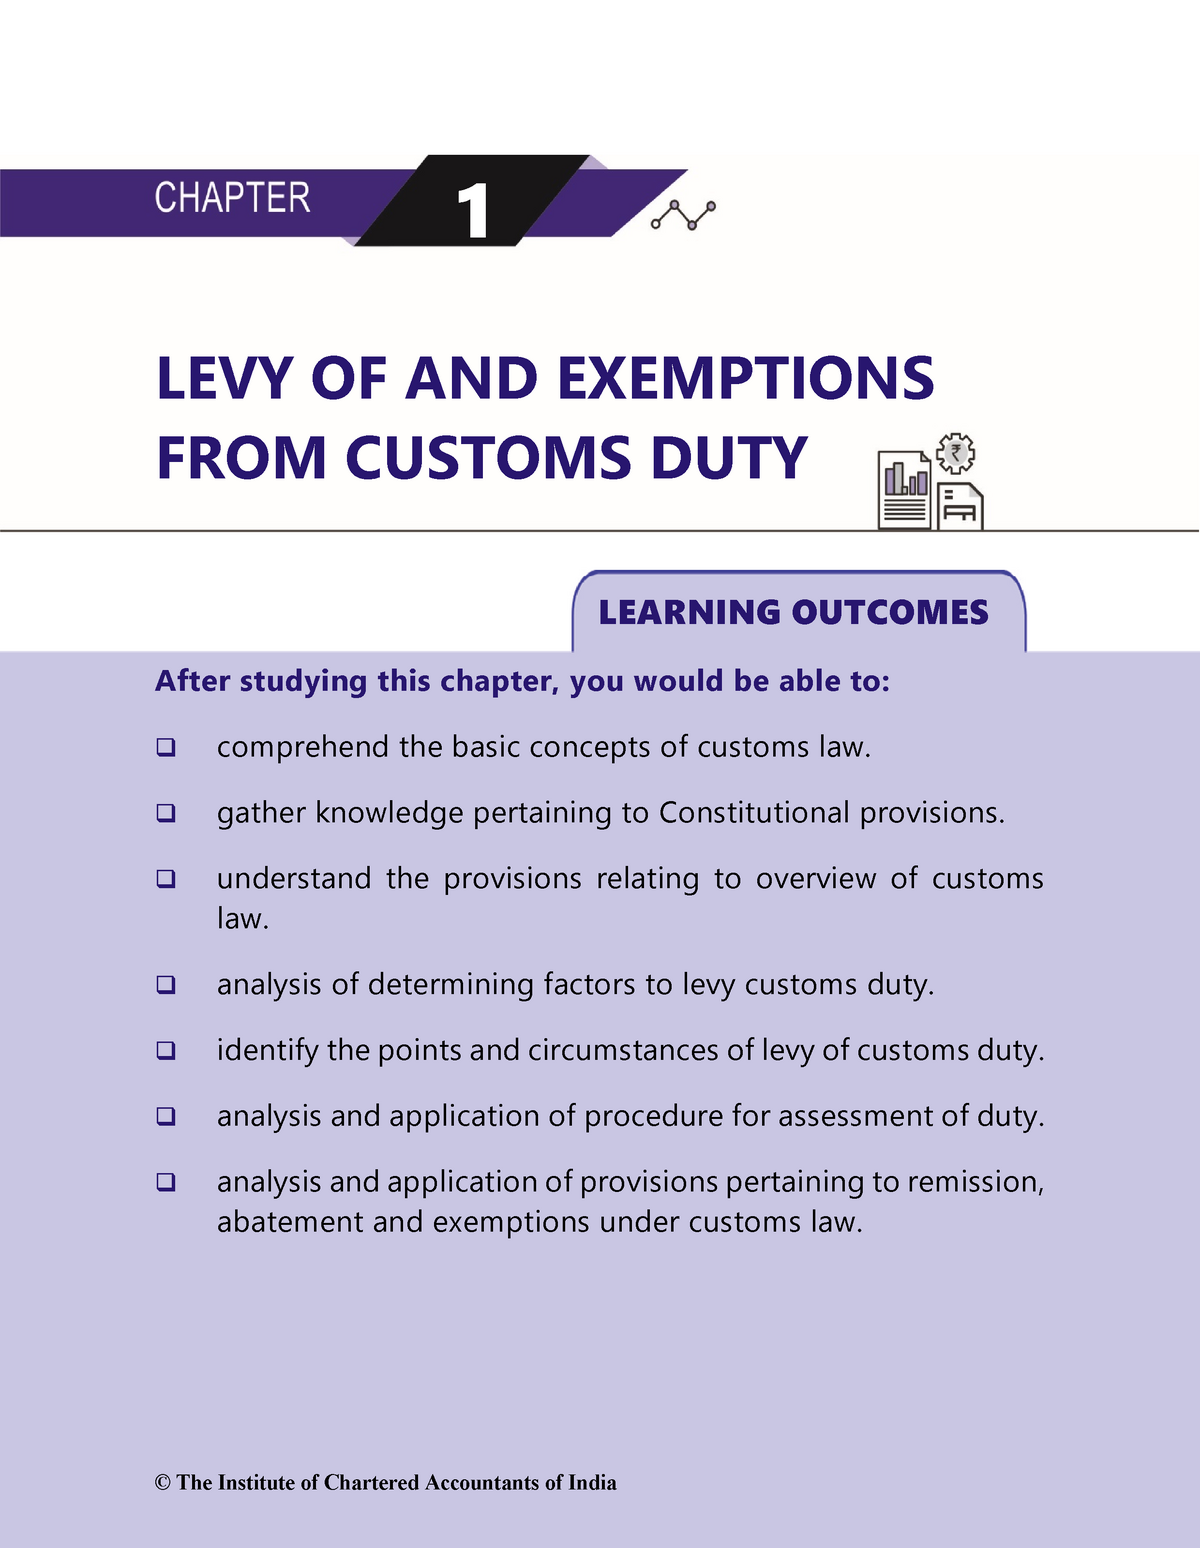 What is exemption from customs duty in India?